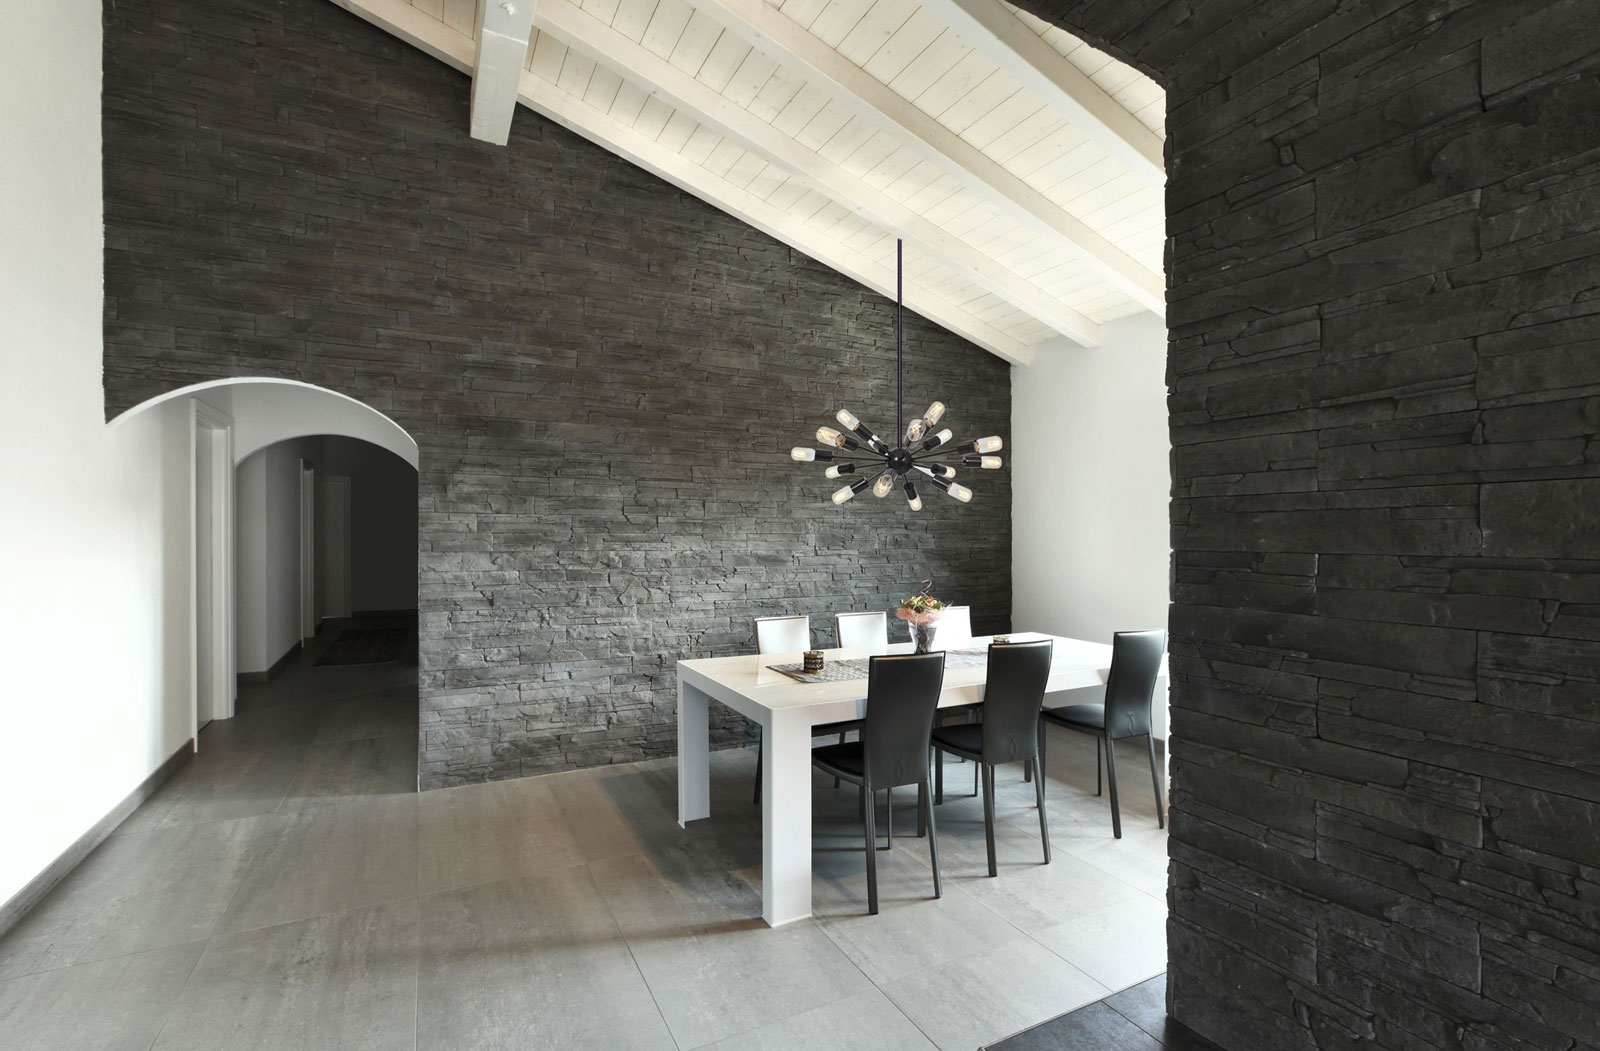 Contemporary Dining Wooden Amazing Contemporary Dining Room Applying Wooden Flooring Furnished With Dining Room Light Fixtures And Completed With White Table And Black Chairs Dining Room 15 Minimalist Dining Room Light Fixtures To Inspire You